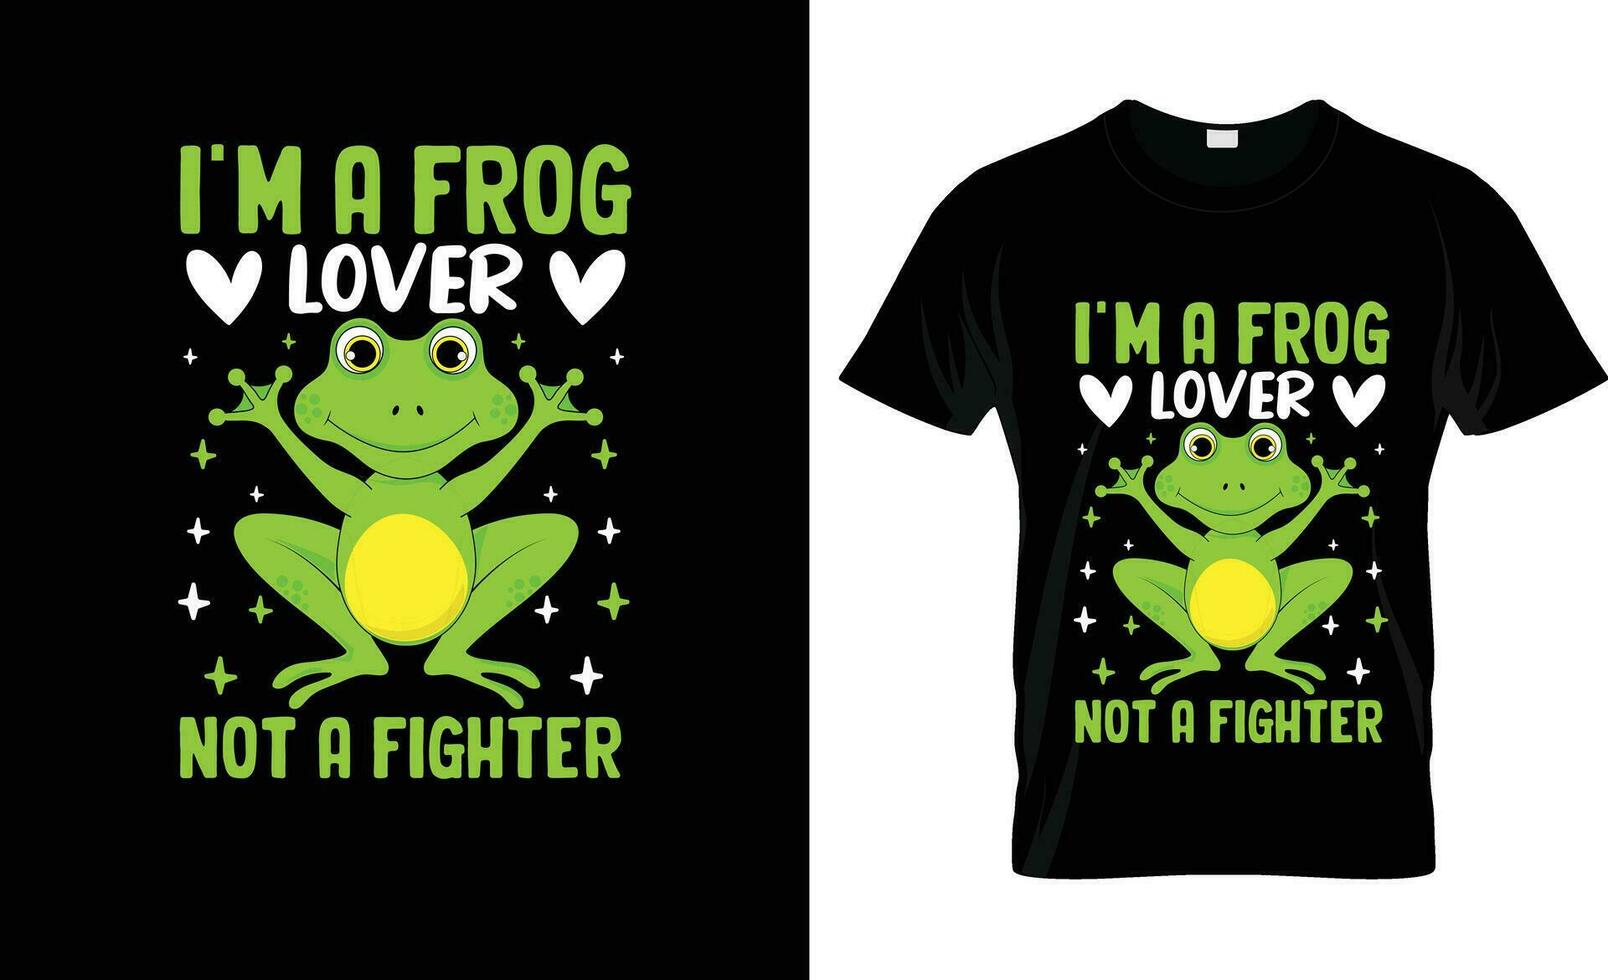 Im A Frog Lover Not A Fighter colorful Graphic T-Shirt,t-shirt print mockup vector